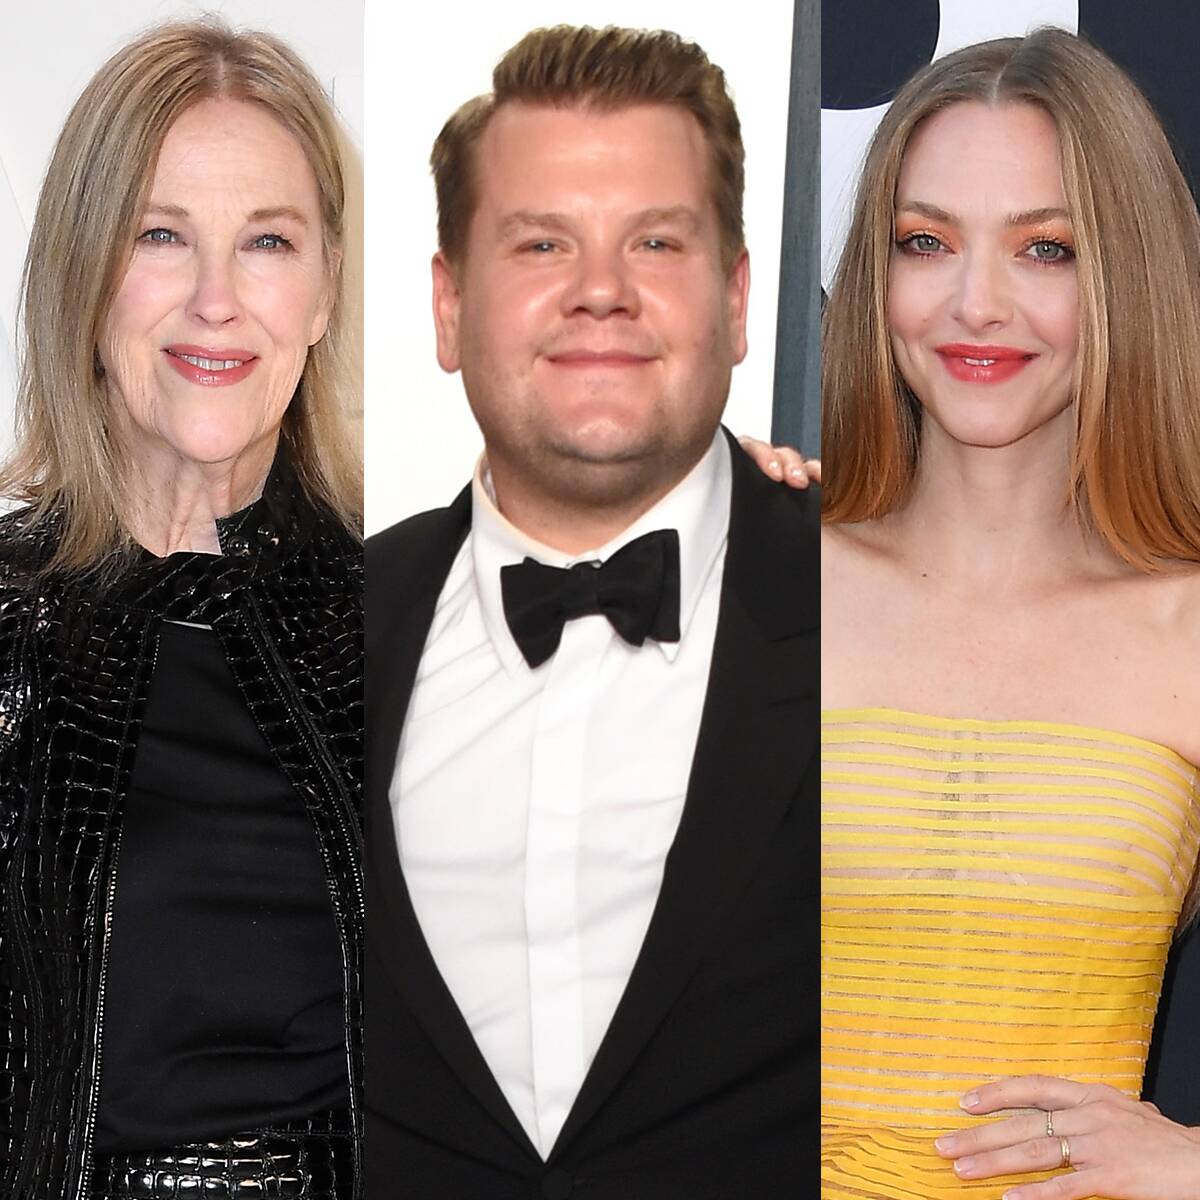 See Every Star Up For Their First Trophy at the 2021 Golden Globes